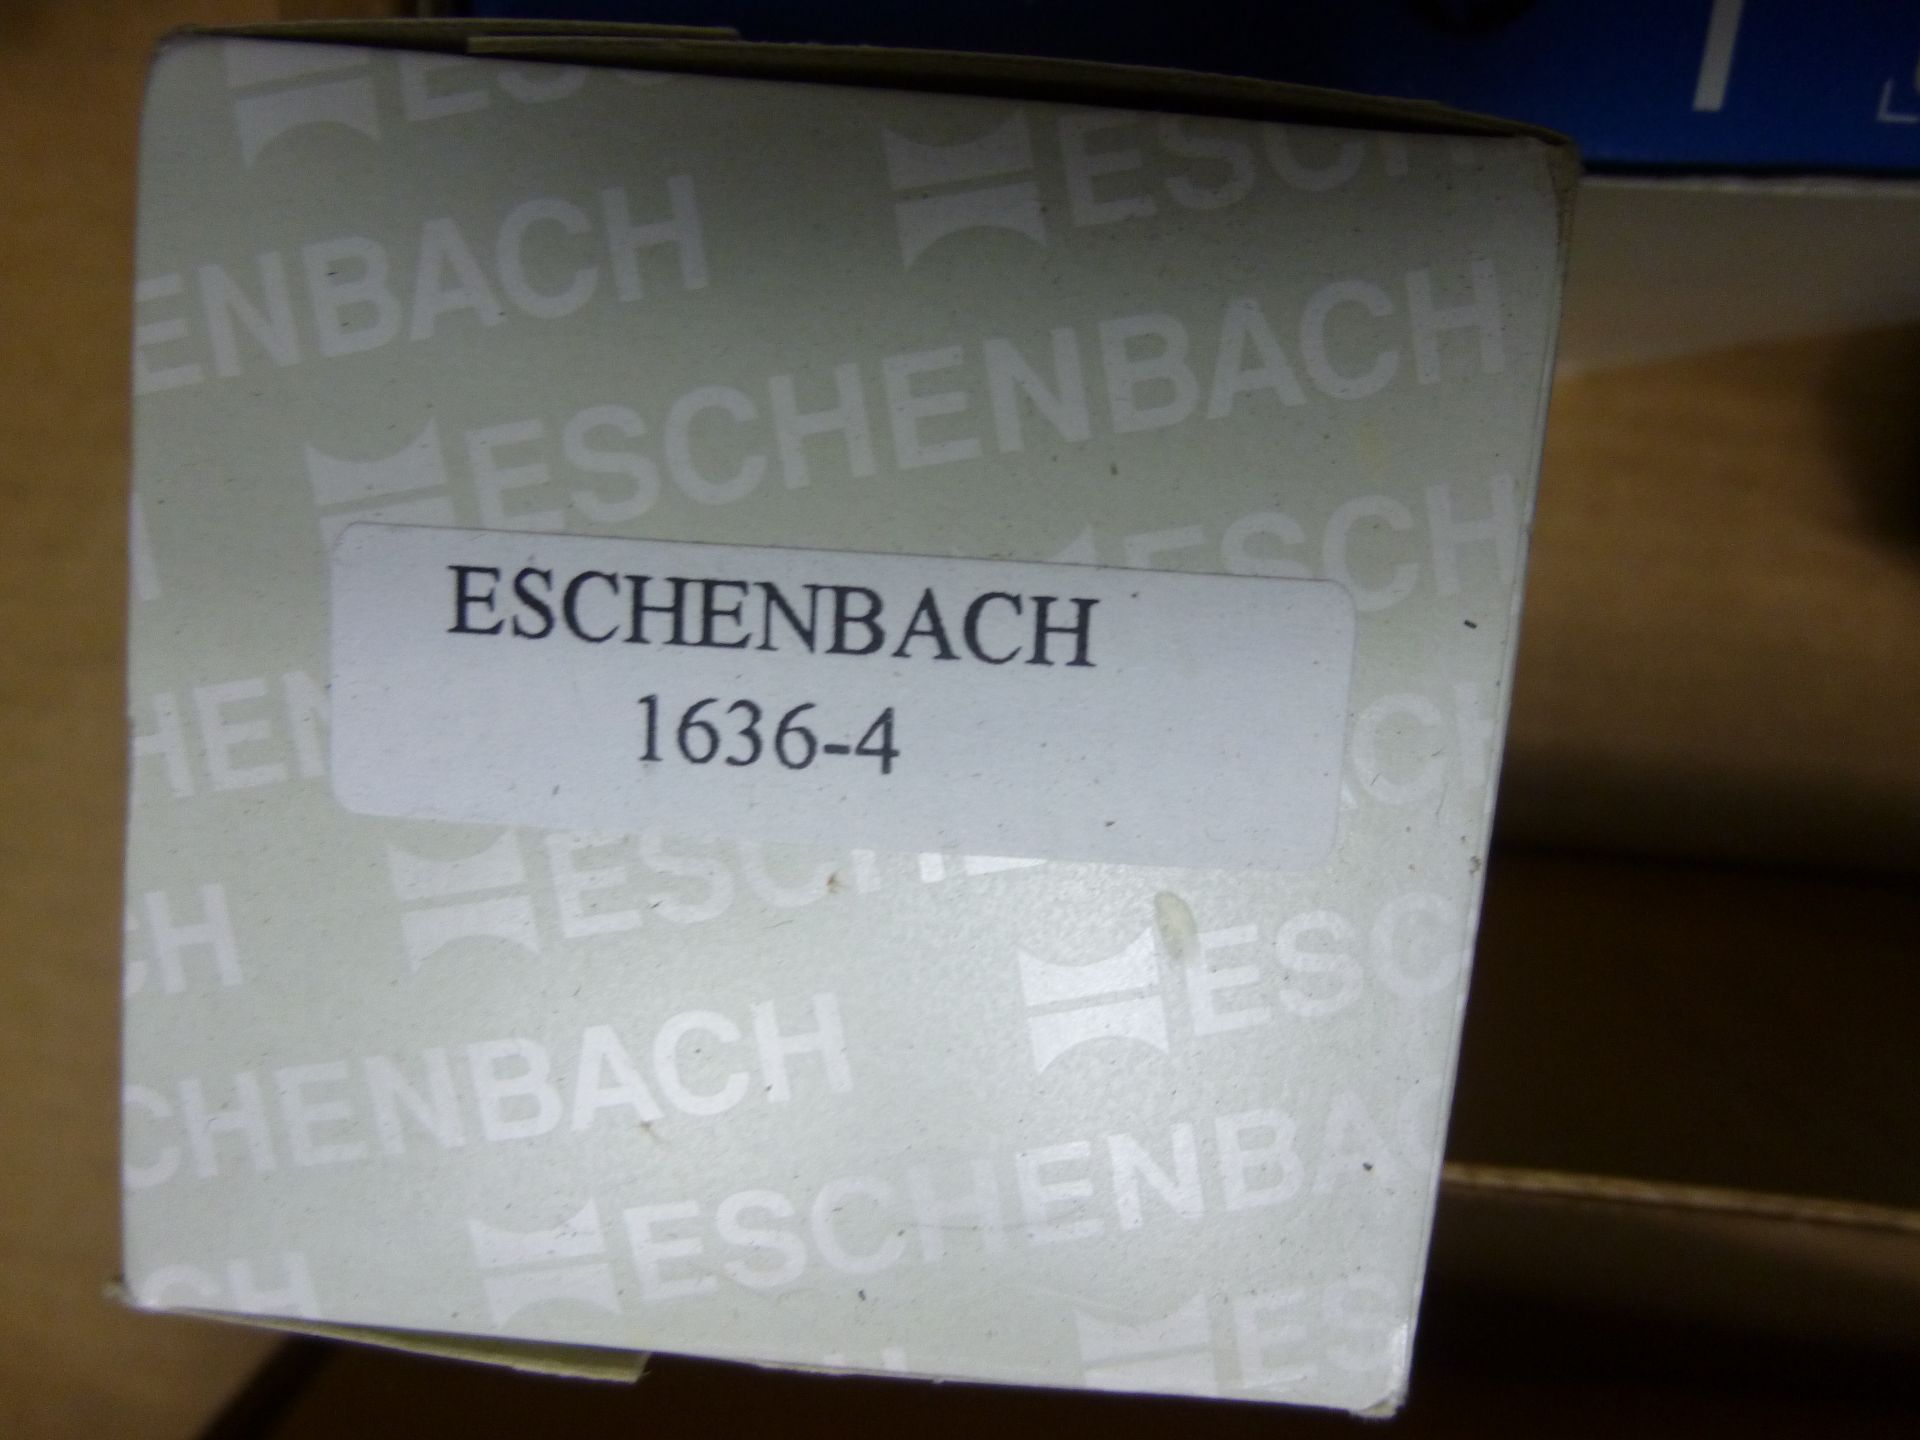 Lot of new Eschenbach optica loops magnifying glasses etc (new in boxes) Shipping can be prepared - Image 8 of 9